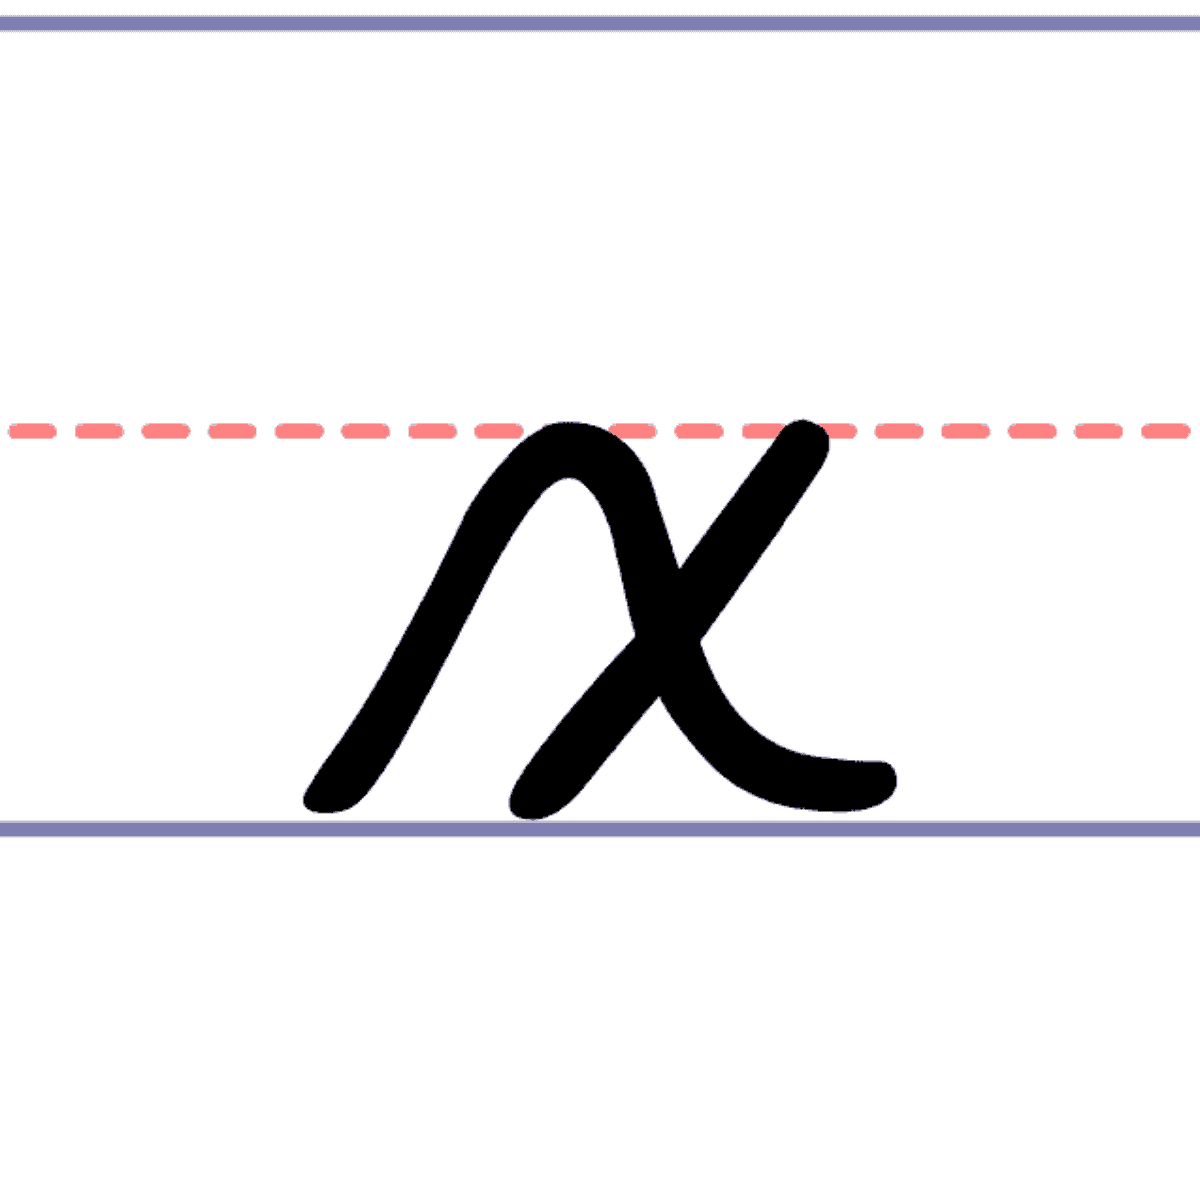 How to Write a Cursive Lowercase x